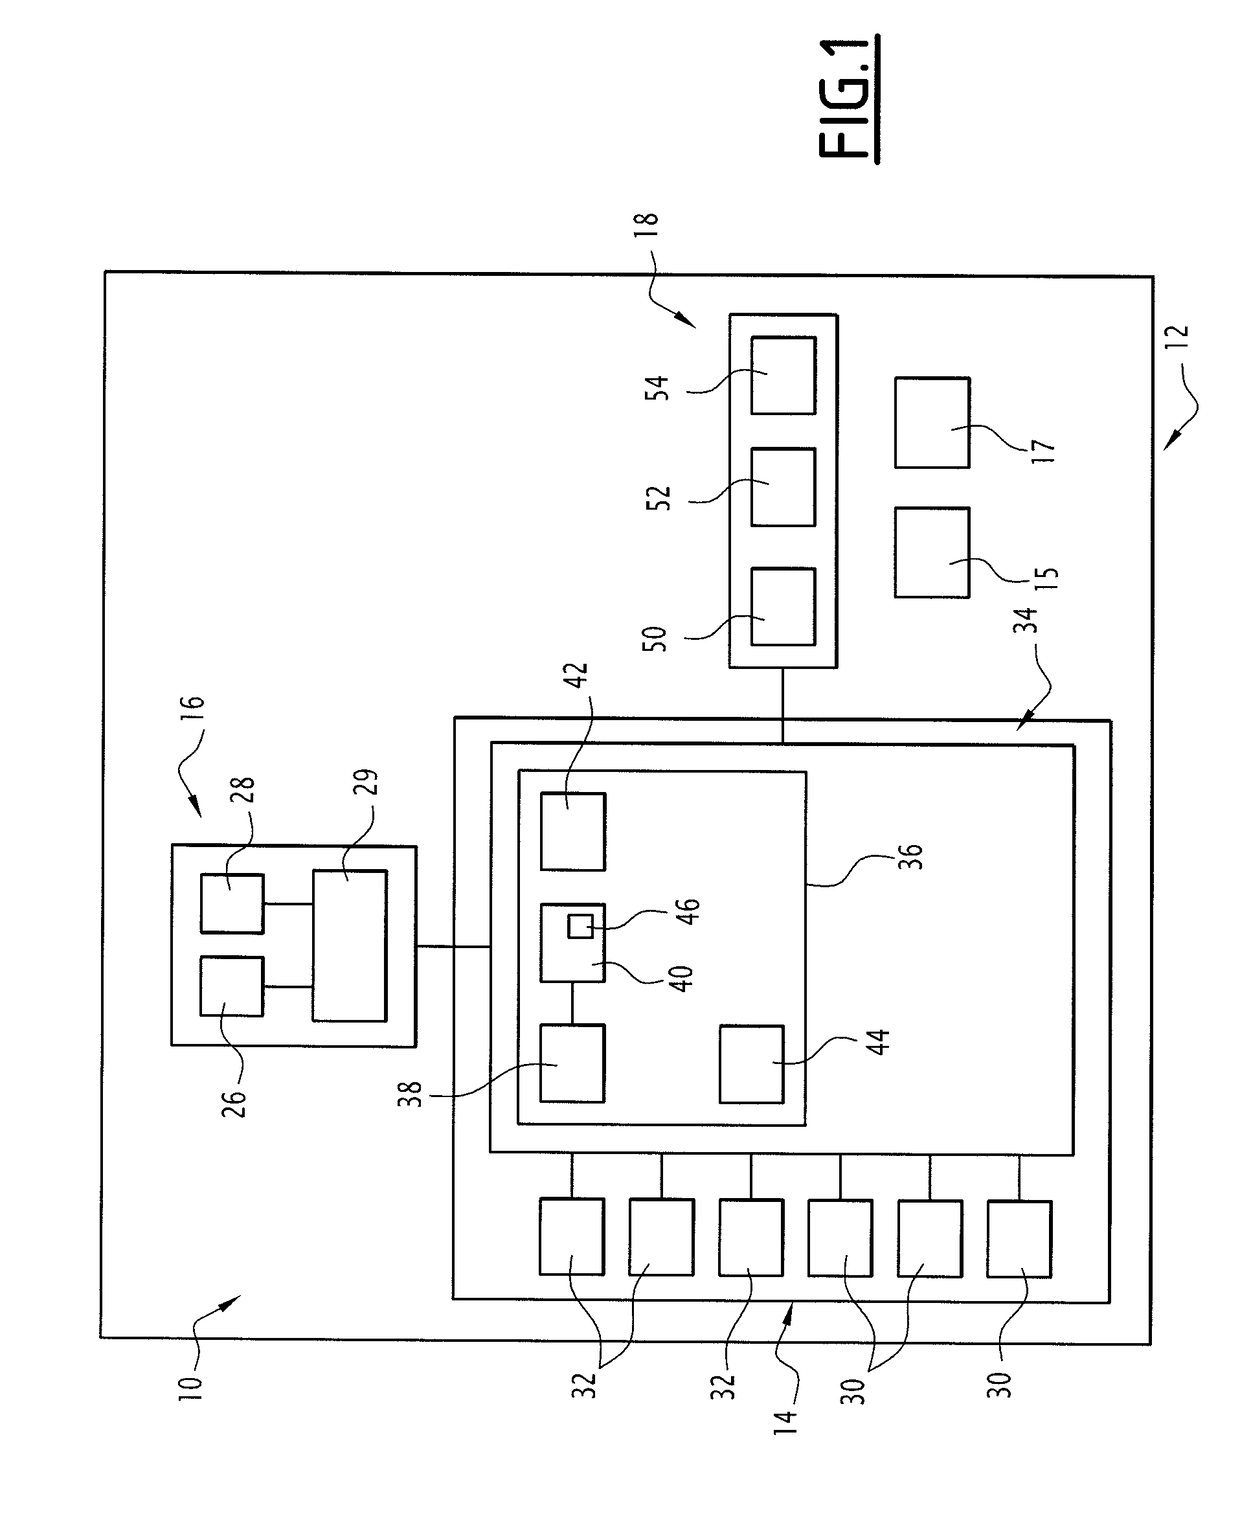 Method for detecting a failure of at least one sensor onboard an aircraft implementing a baro-inertial loop, and associated system